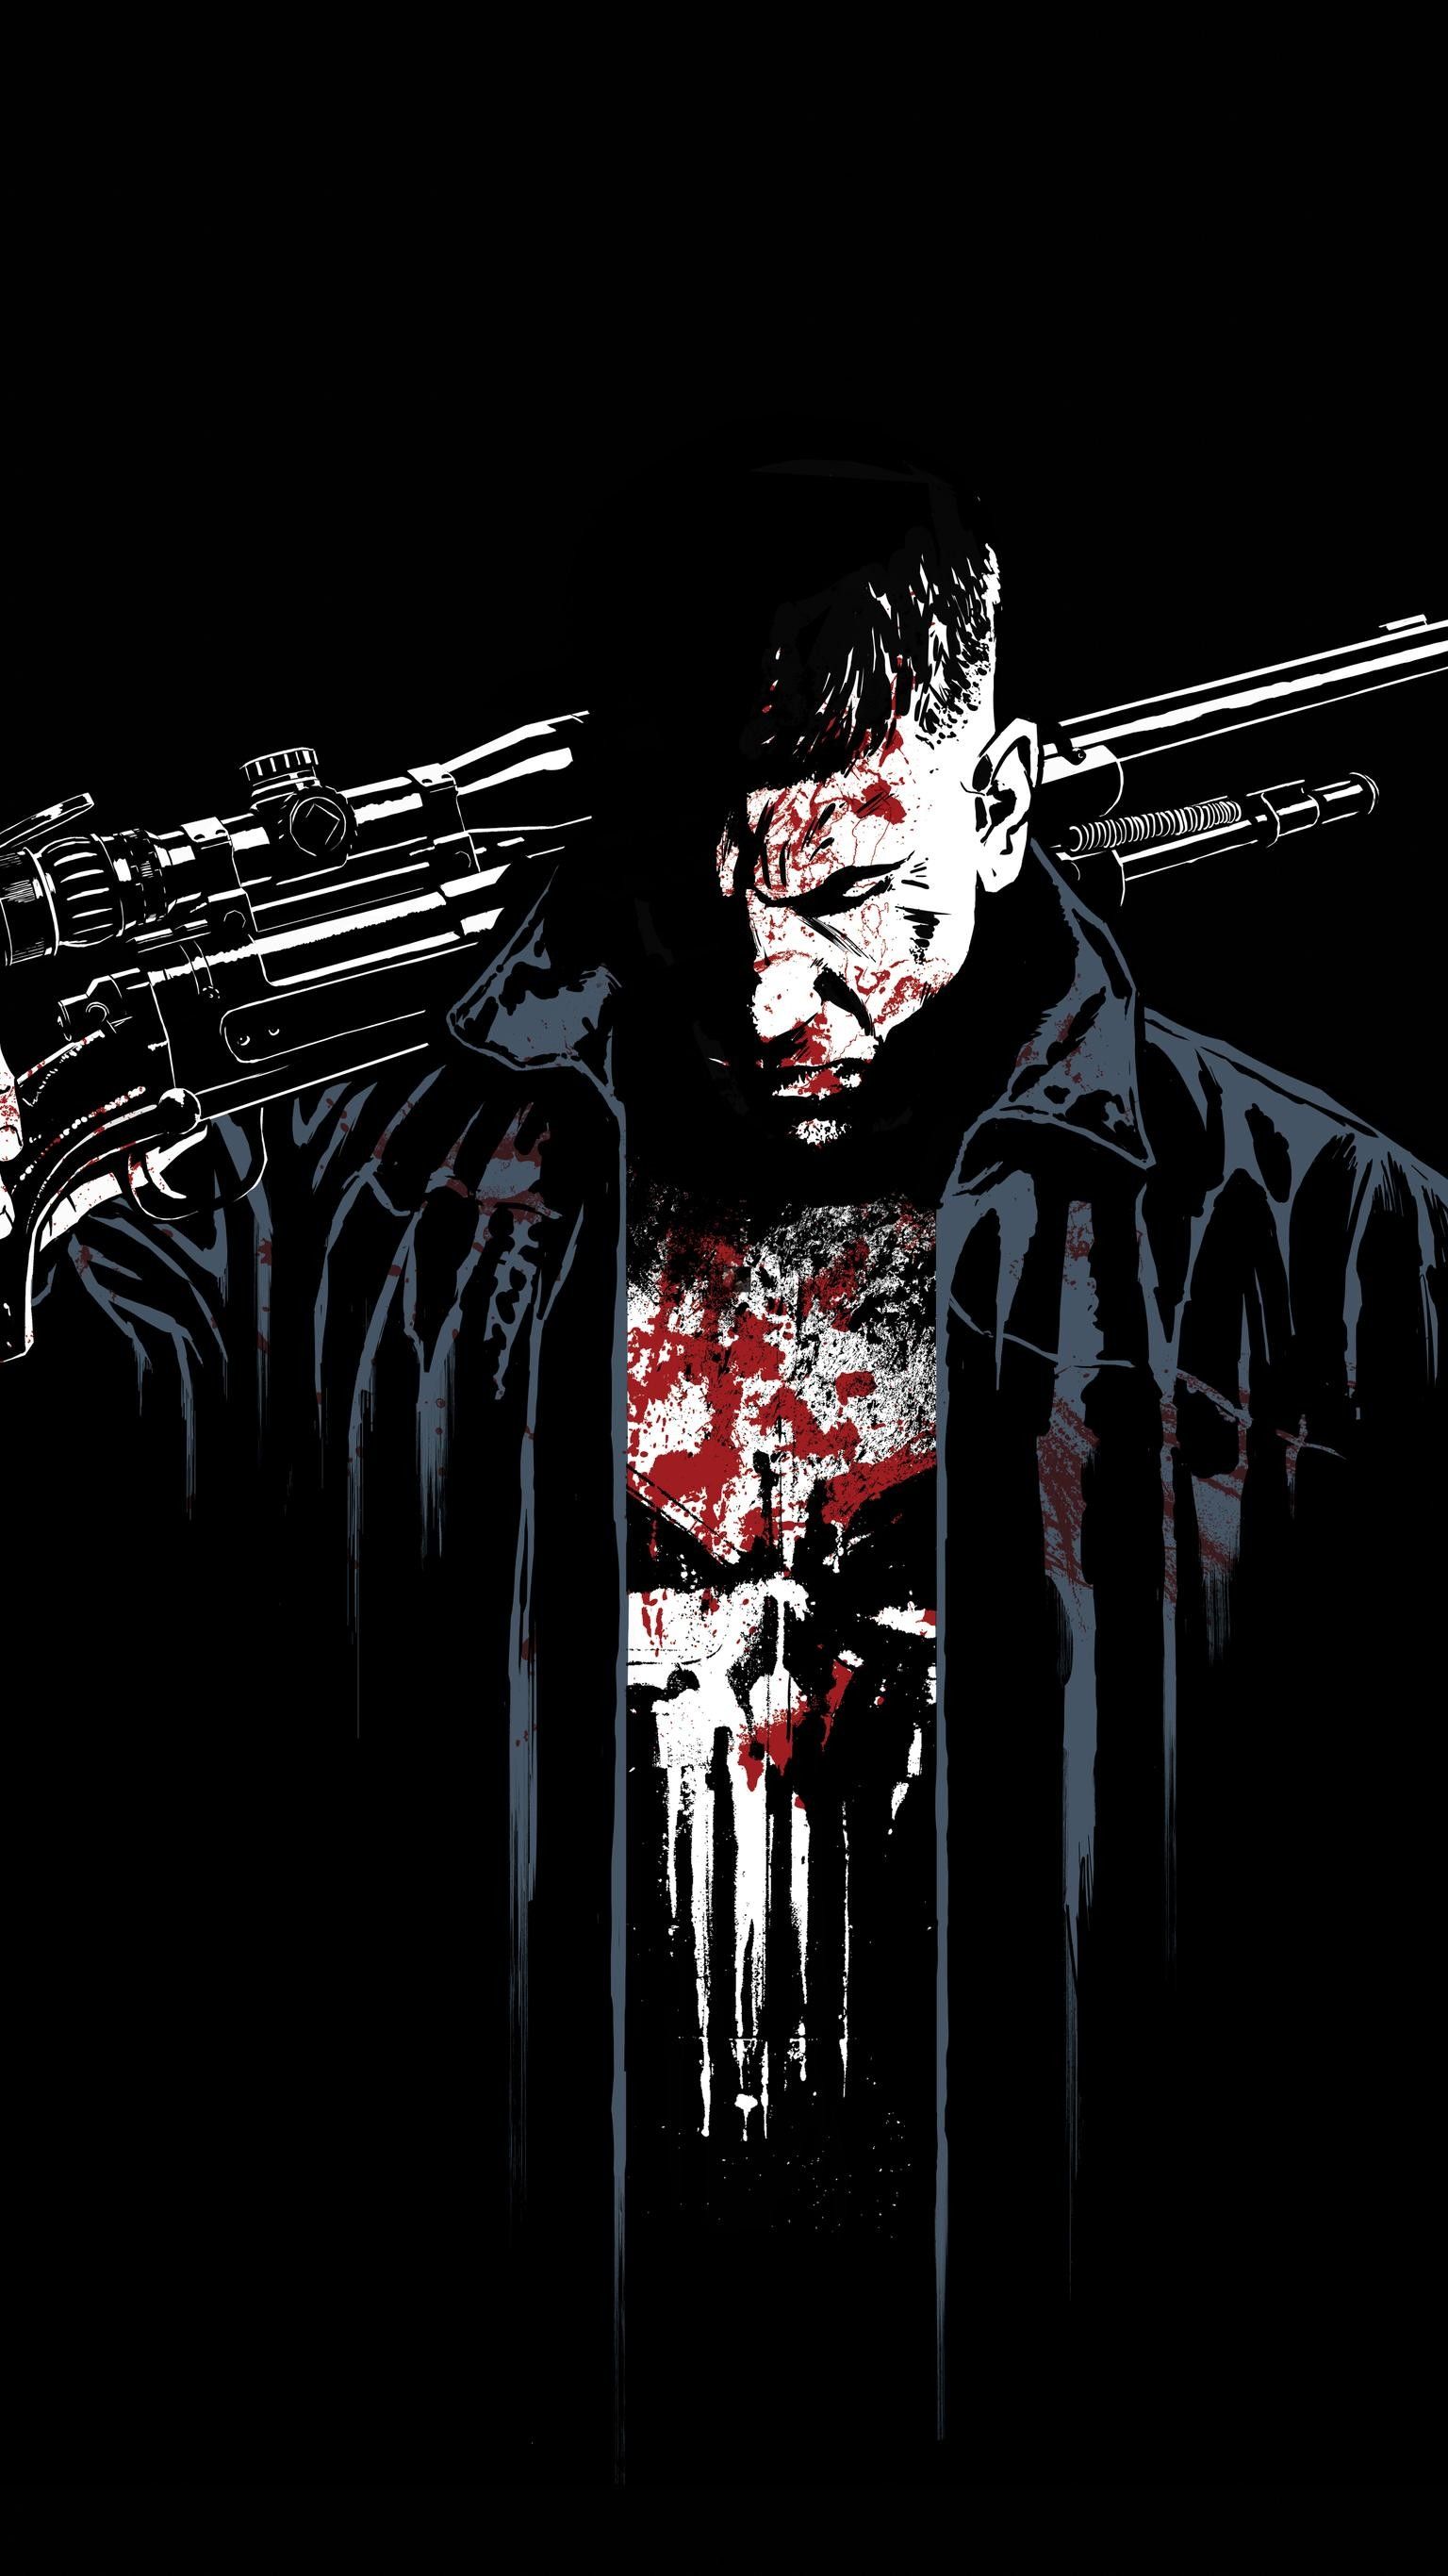 Punisher Iphone Wallpapers